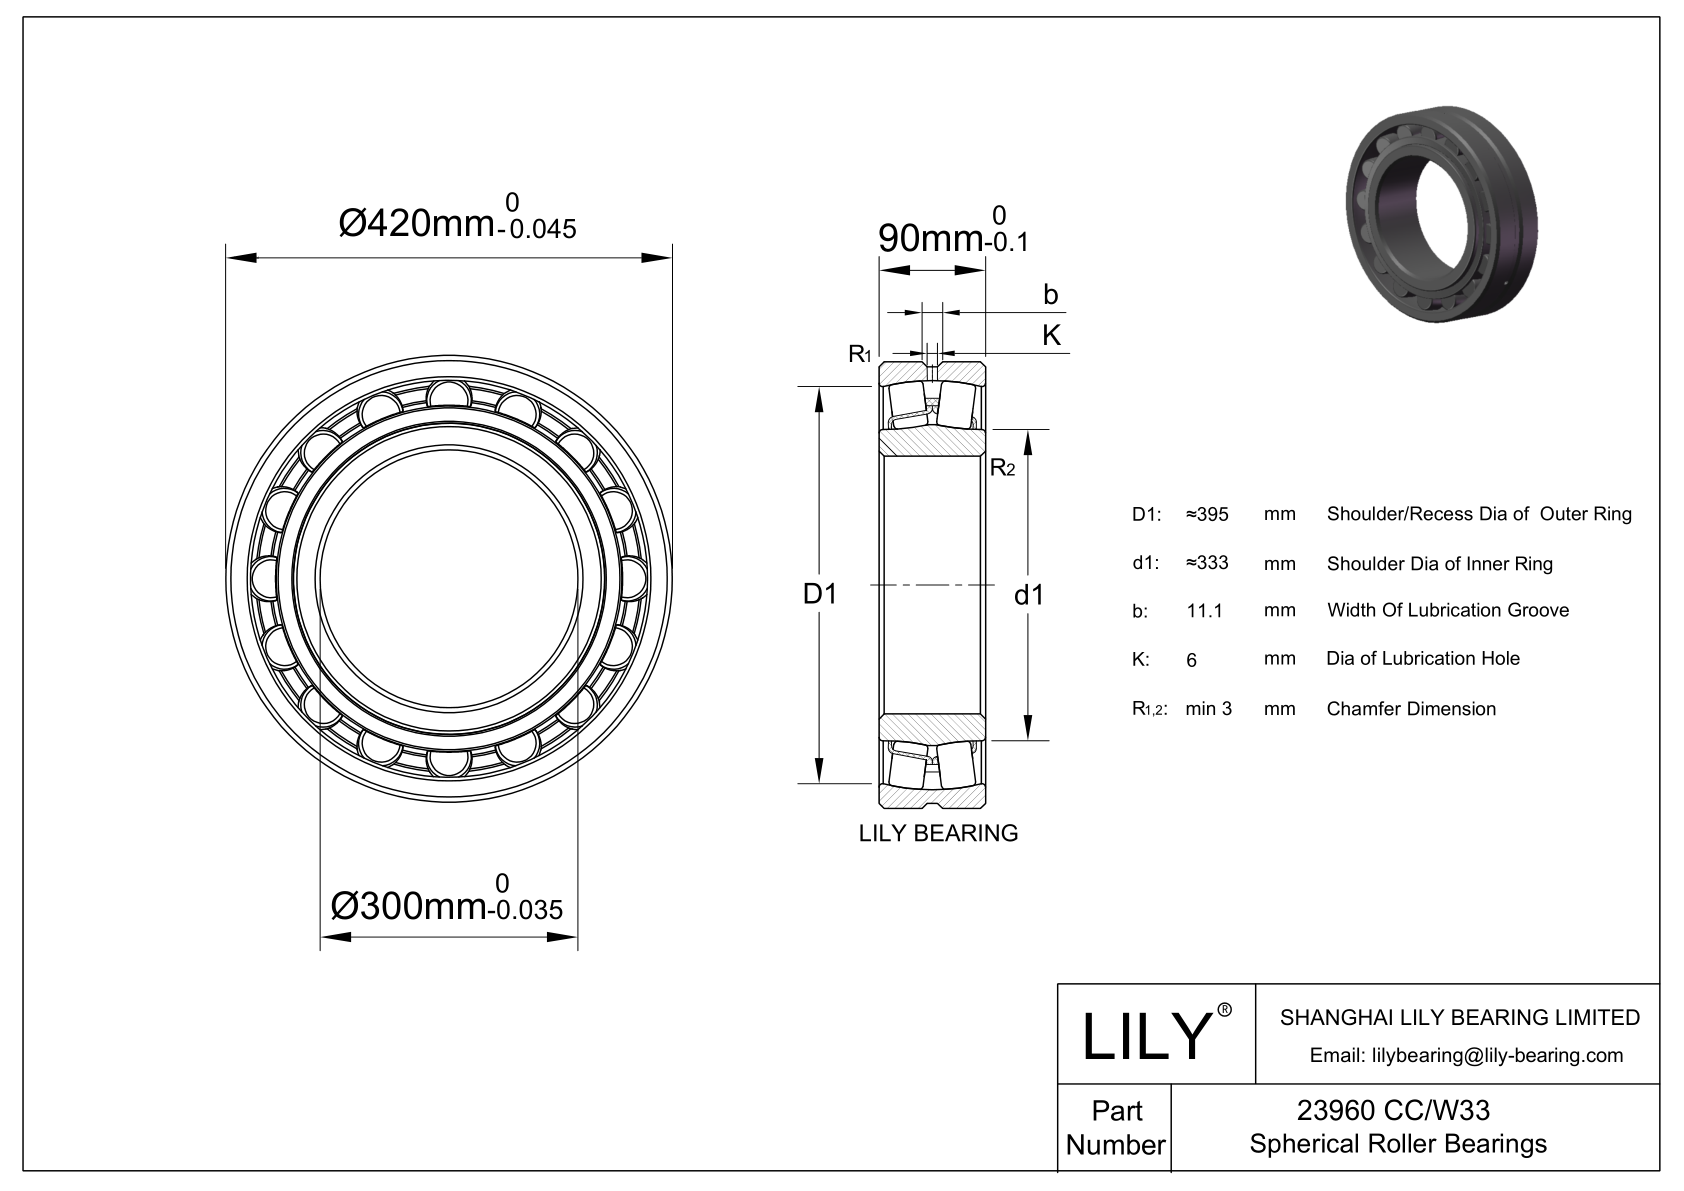 23960 CC/W33 Double Row Spherical Roller Bearing cad drawing